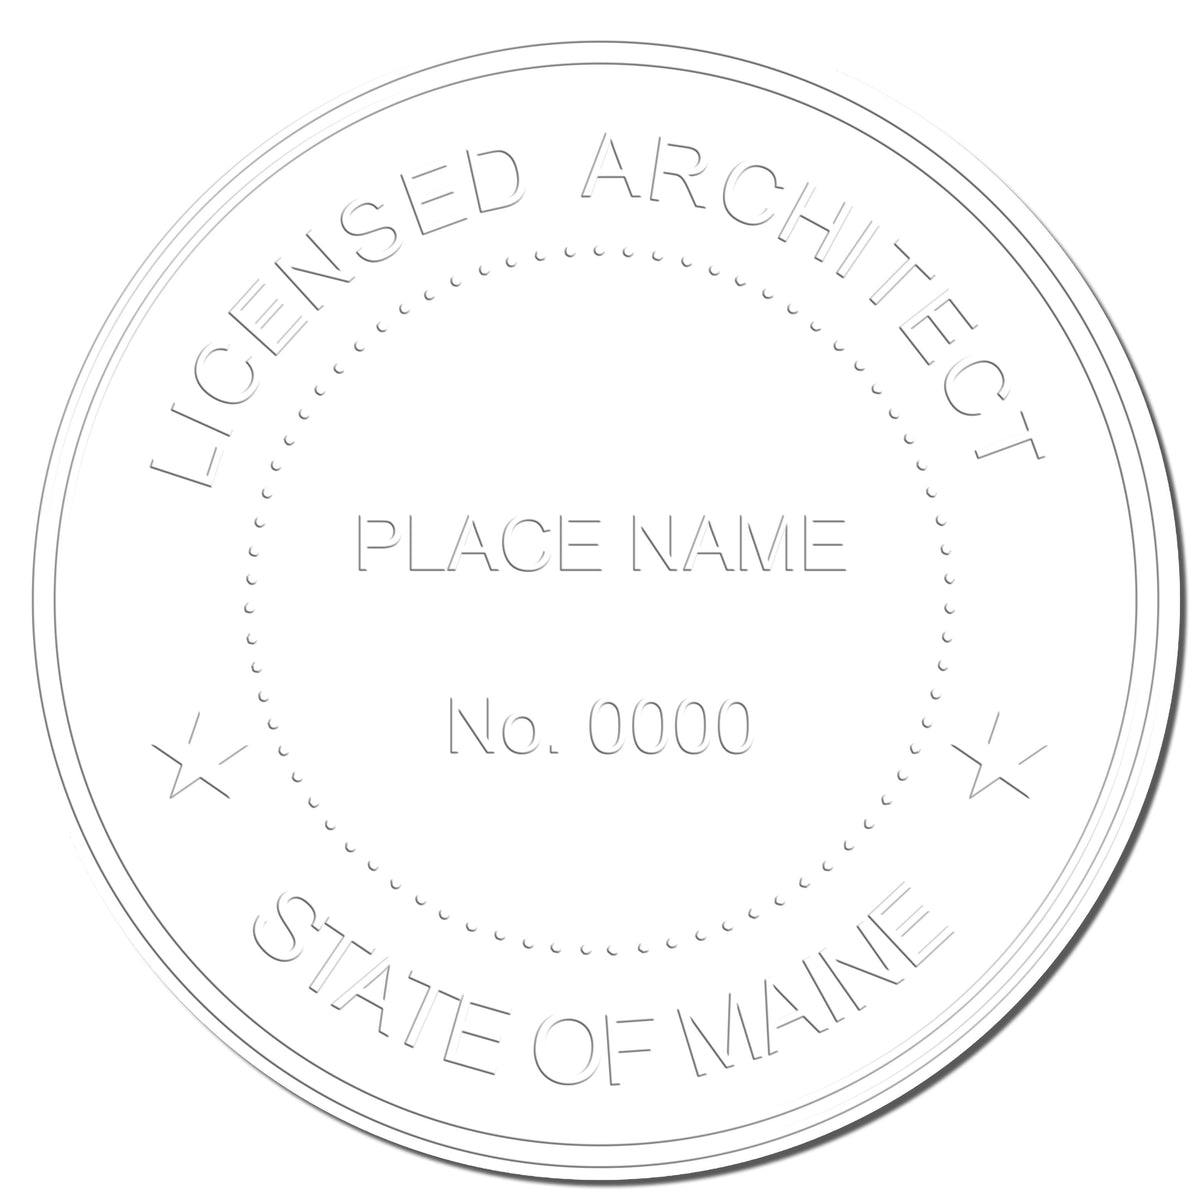 A photograph of the Maine Desk Architect Embossing Seal stamp impression reveals a vivid, professional image of the on paper.